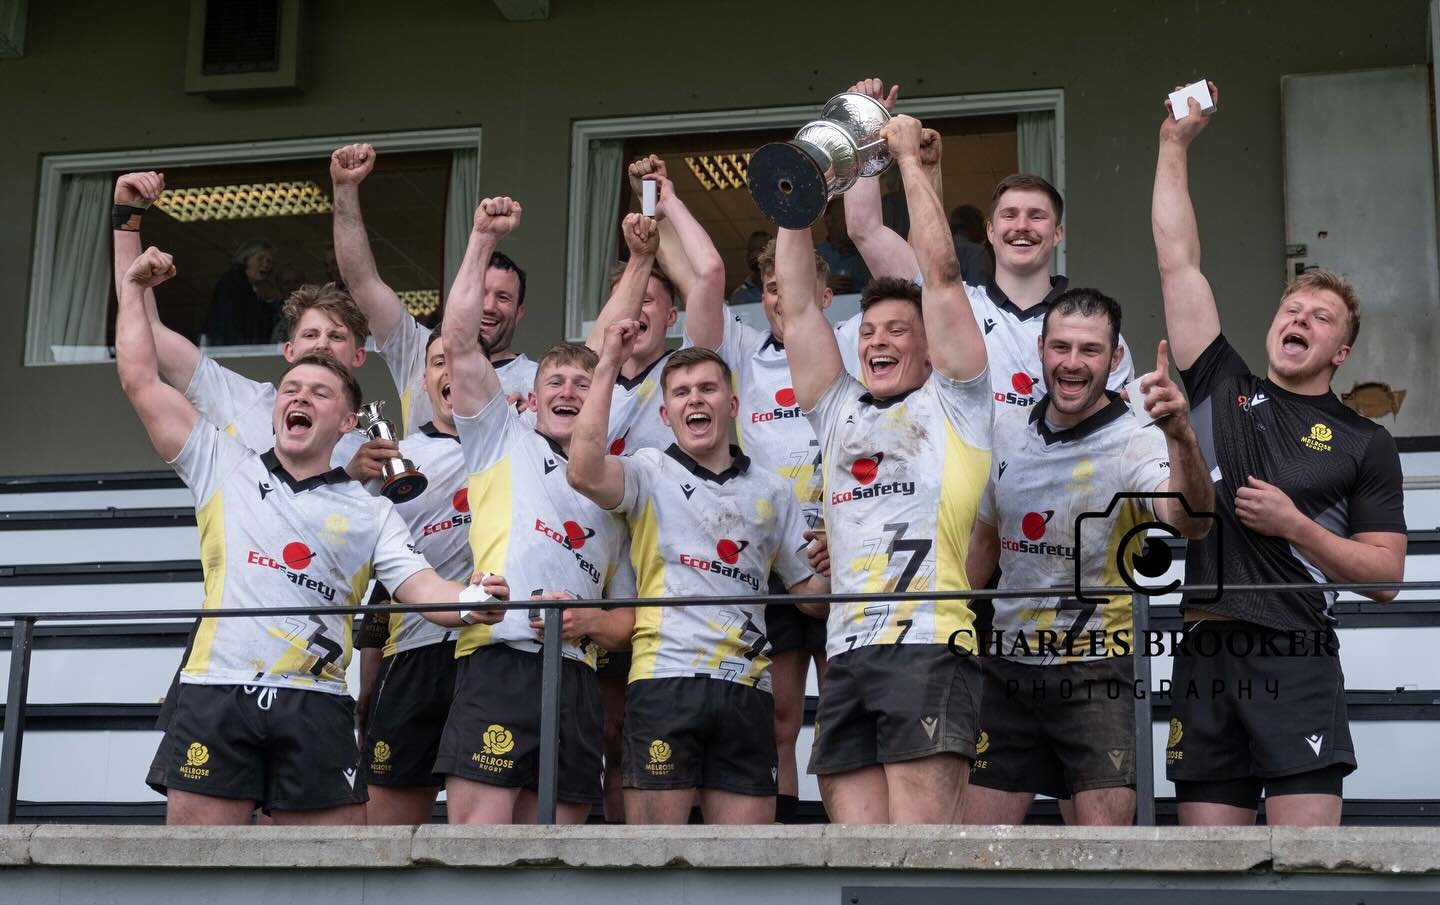 Busy weekend of 7s 
🥇 @kelsorugbyclub 7s on Saturday 
🥈 @earlstonrugbyclub 7s on Sunday 

10 of the best 📸 from Kelso 7s. Thanks Charles Brooker for the pics!